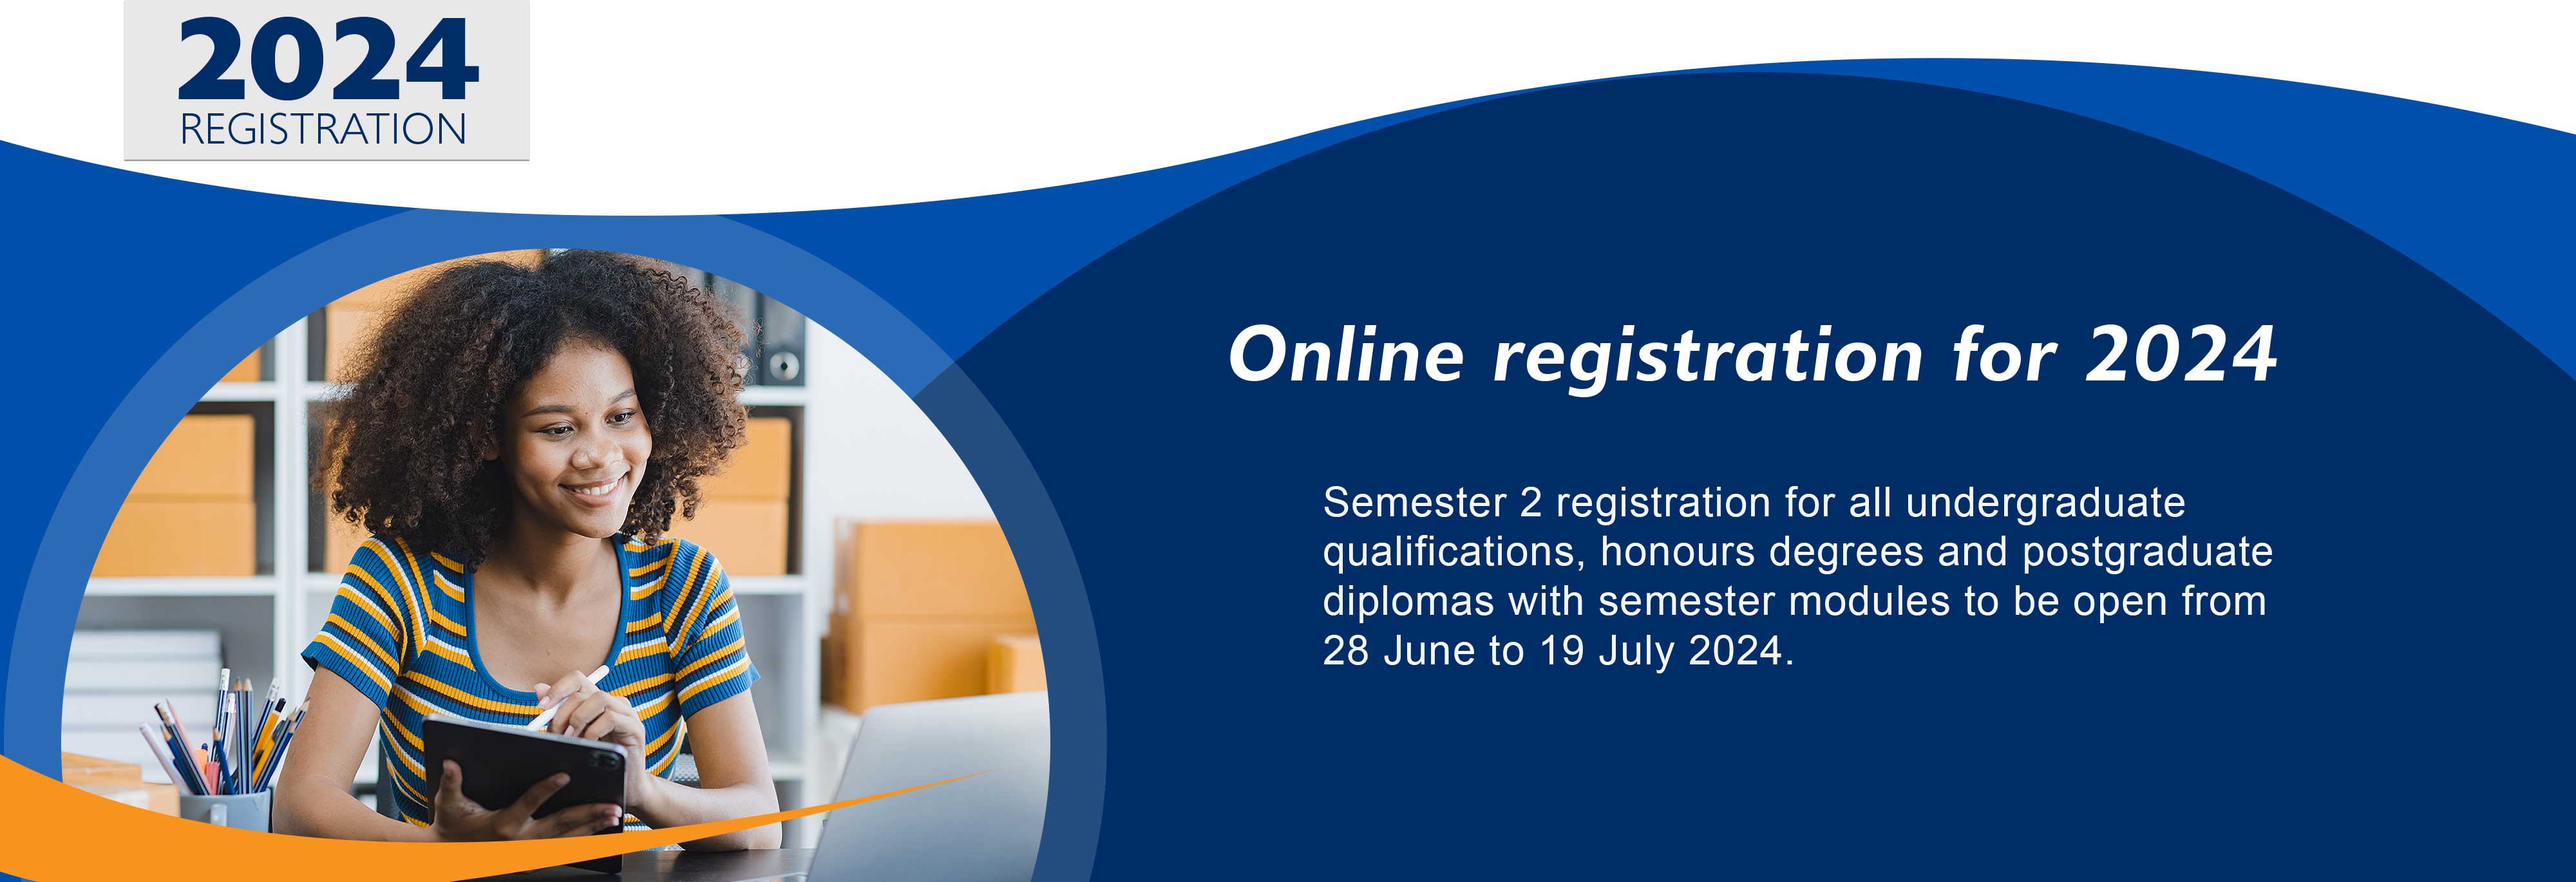 Online registration for the second semester of 2024